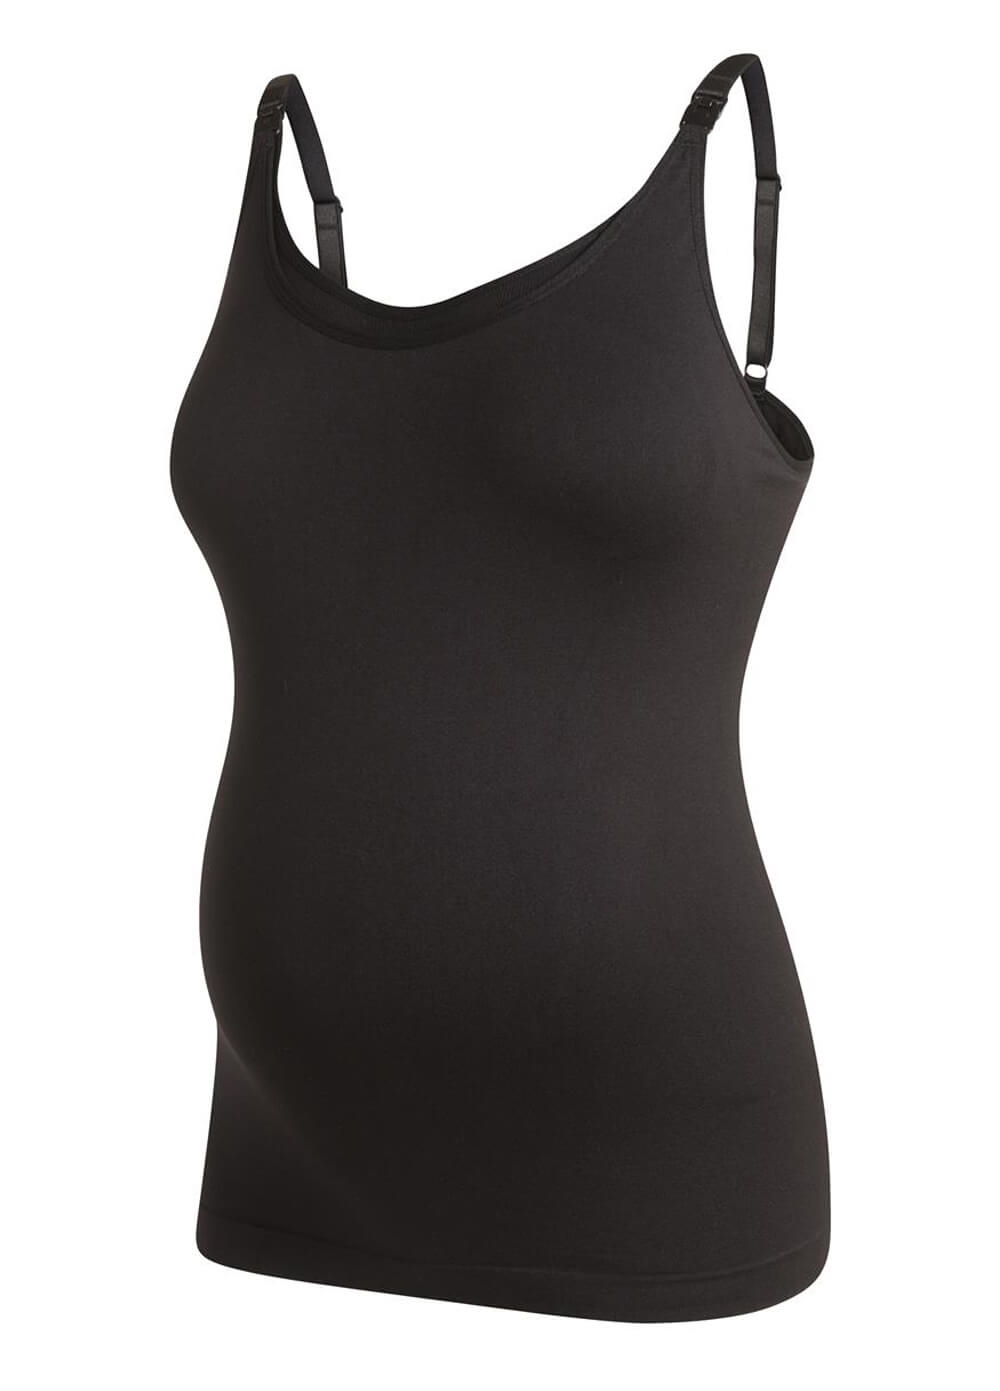 Seamless Maternity Nursing Cami in Black by Noppies | Queen Bee